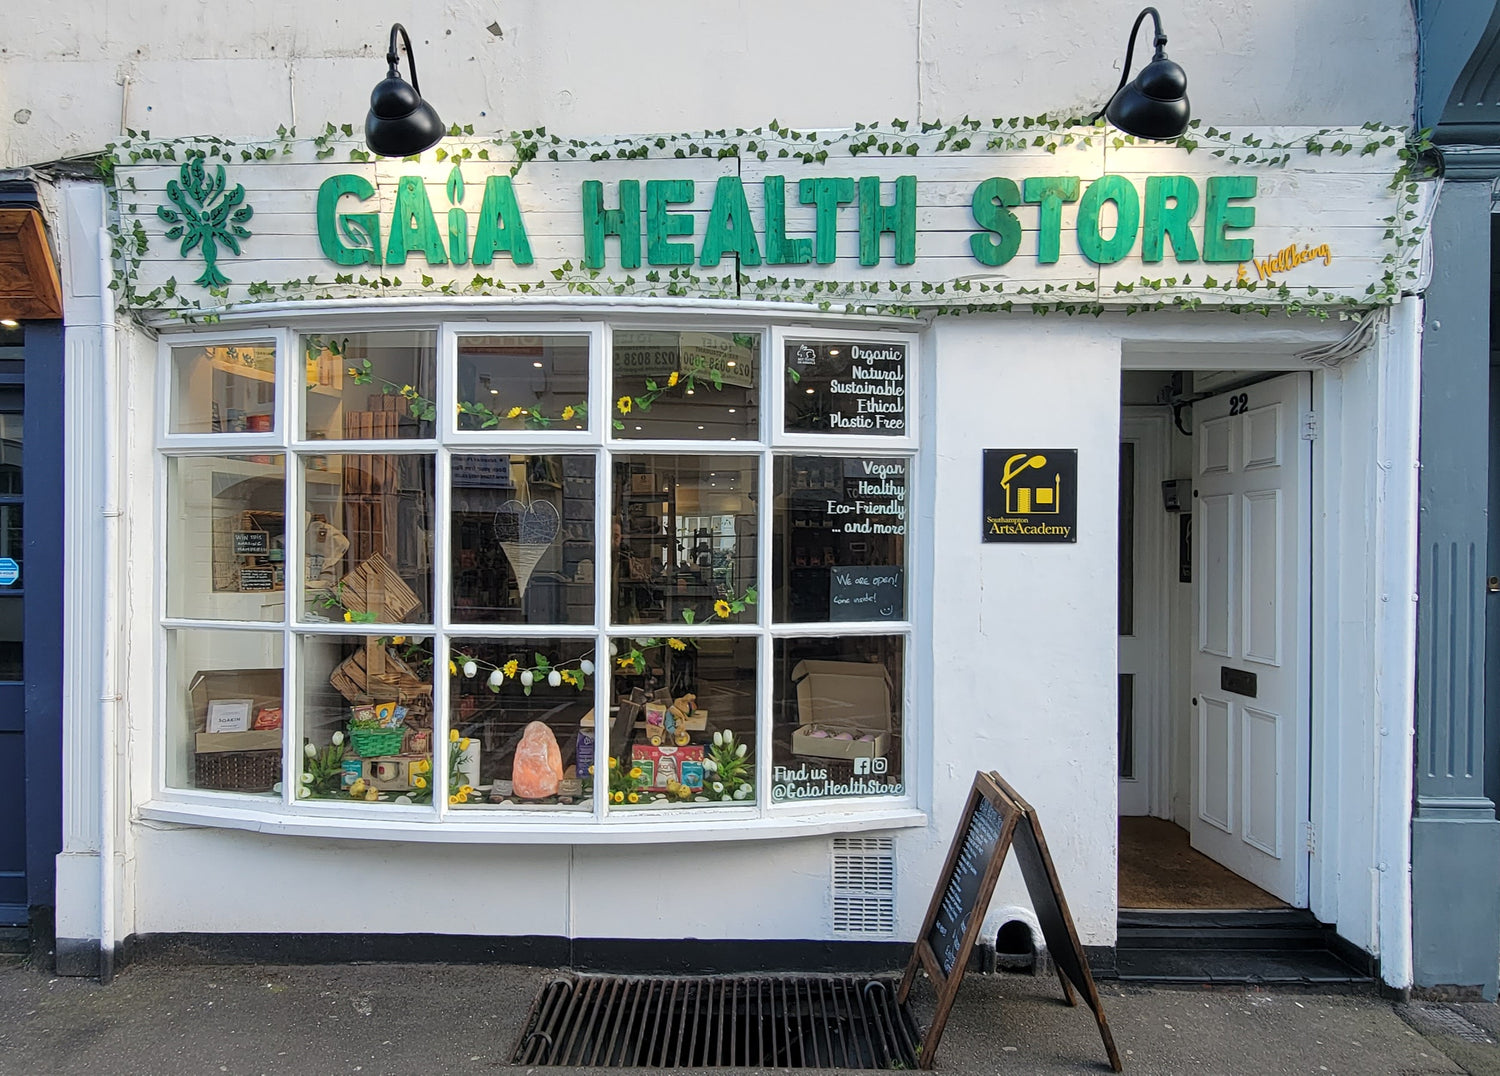 Health Store Southampton, Gaia Health Store, Health and Wellbeing Store, Organic, Gluten Free, Vegan, Natural Health, Free From, Refill Store, Plastic Free, Home Compostable Packaging, Health Store Near Me, Health Store Southampton